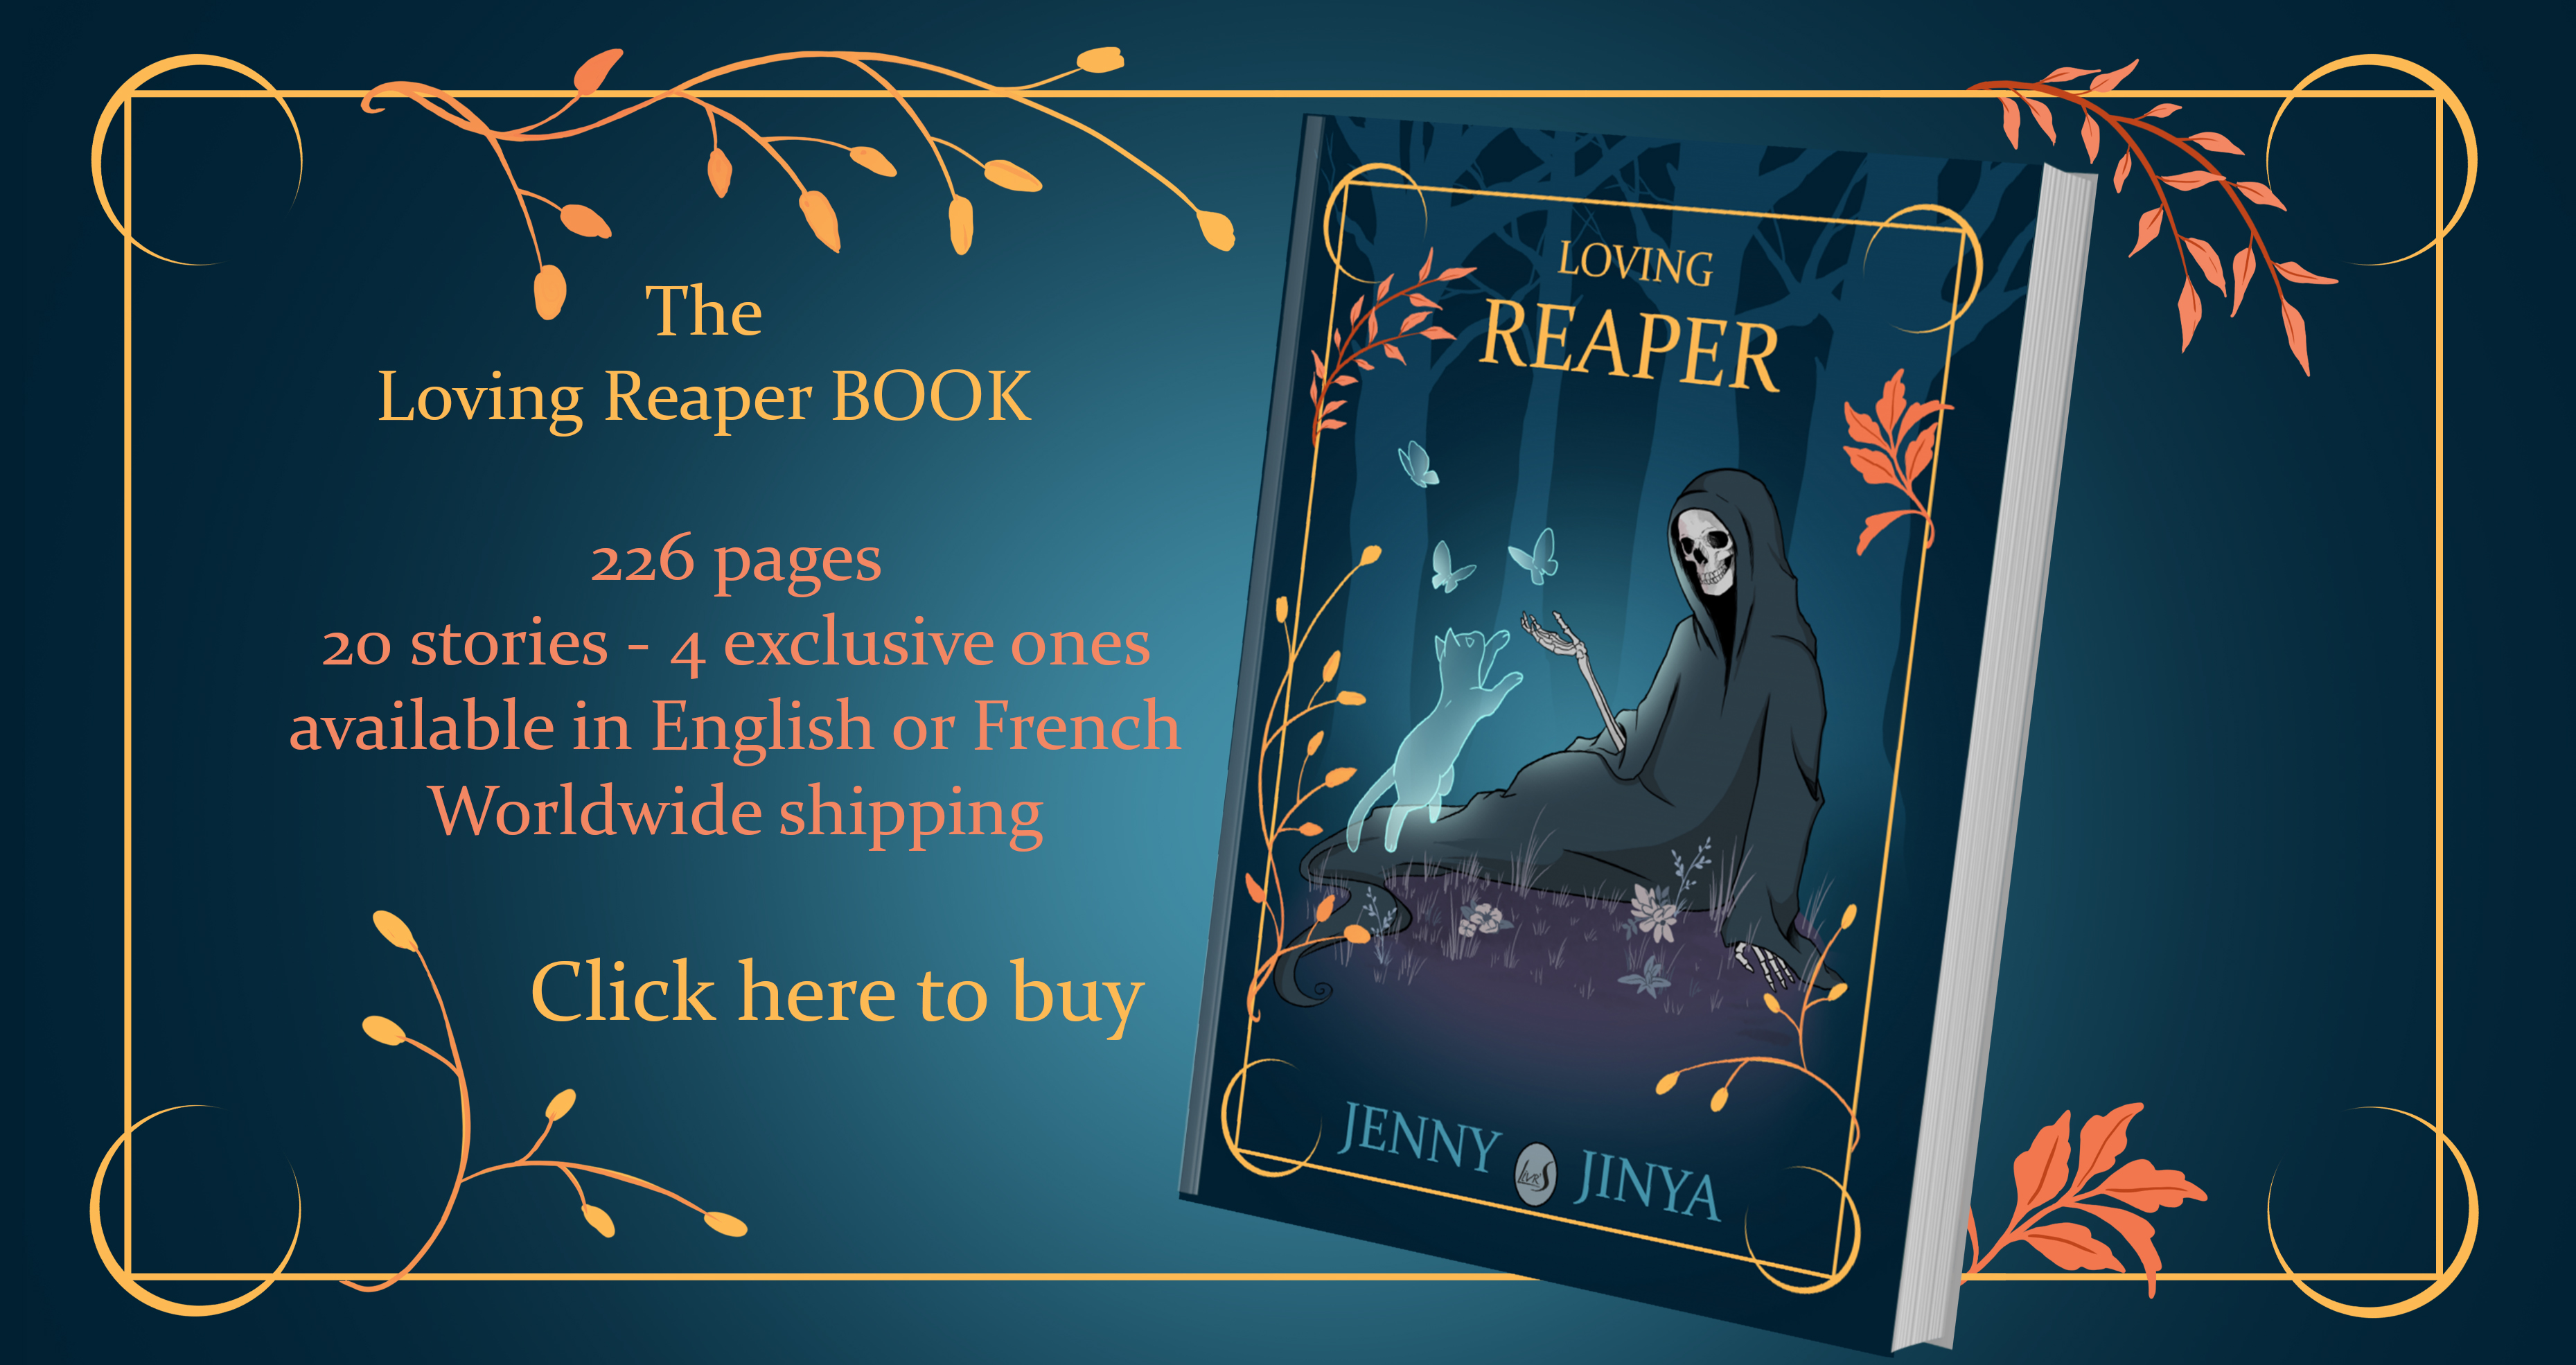 The Loving Reaper Book, Click here to buy